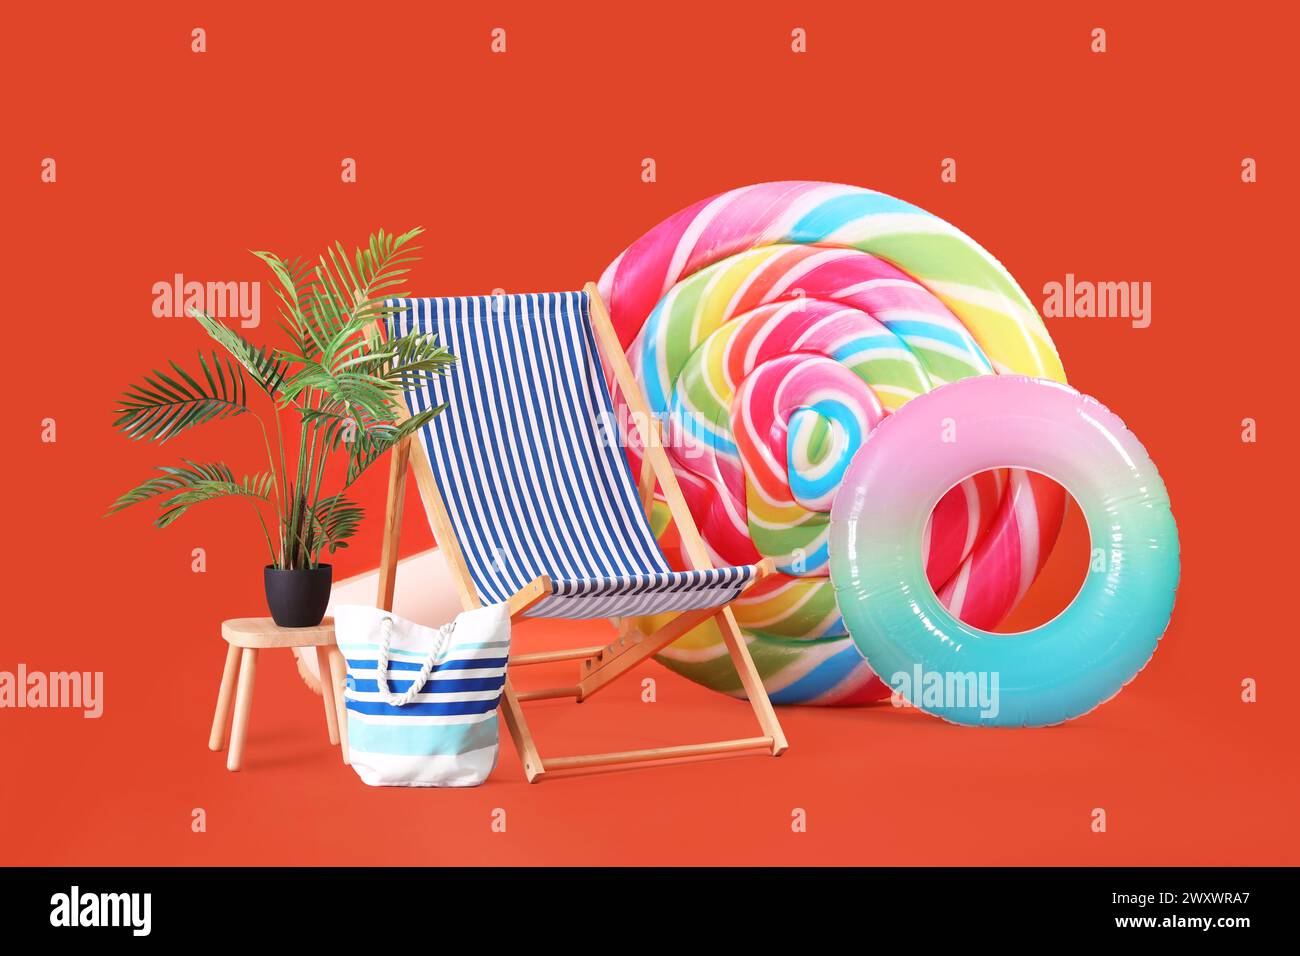 Swimming mattress in shape of candy, inflatable ring and sun lounger on orange background Stock Photo